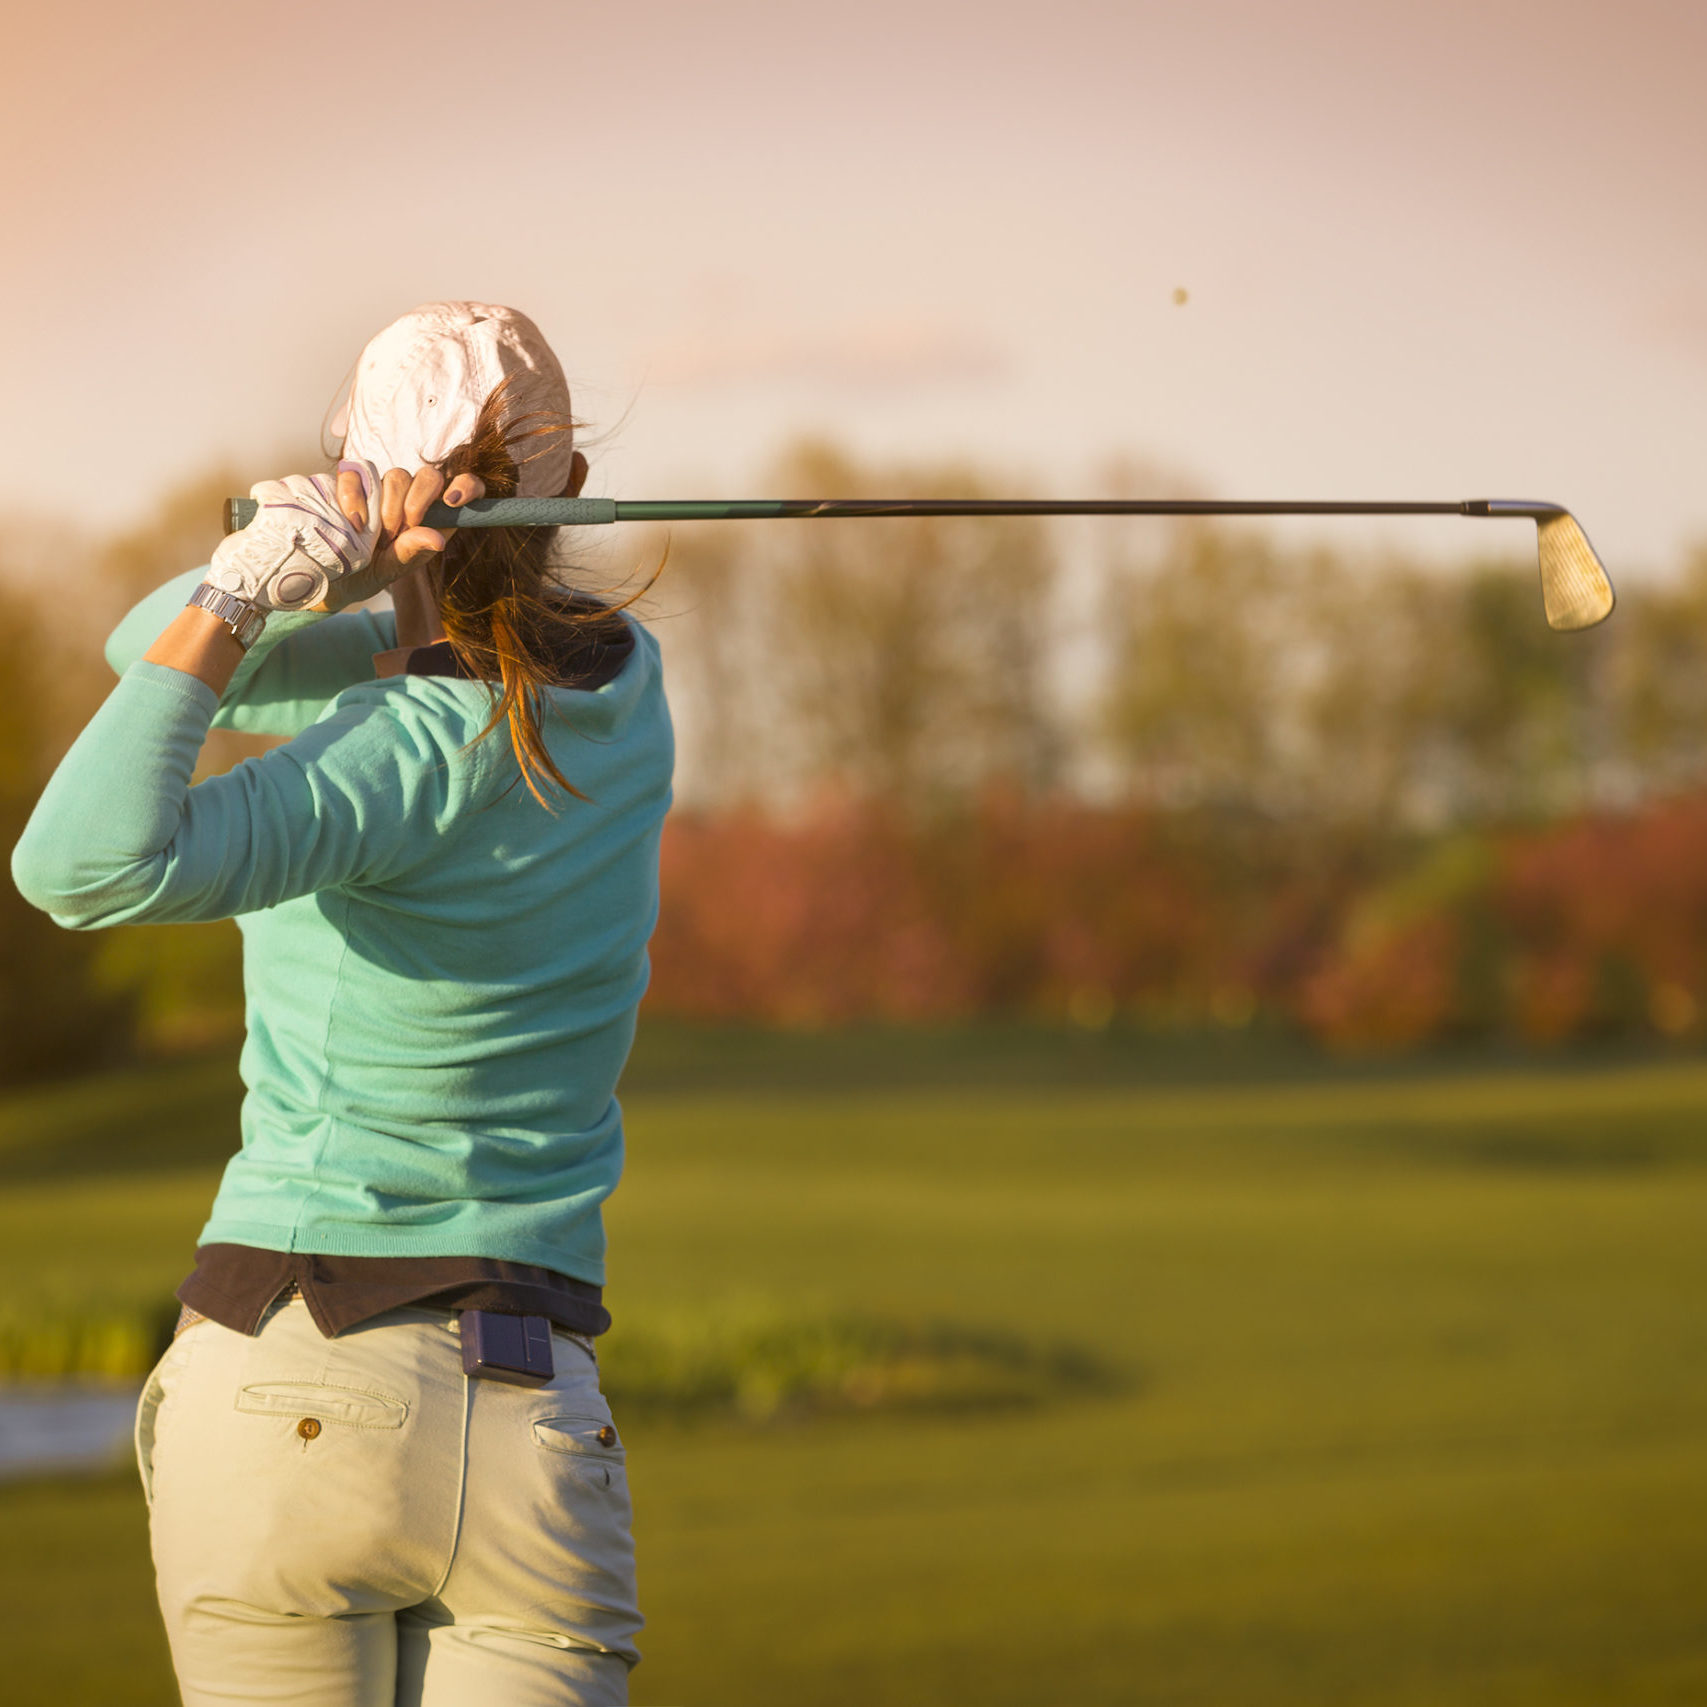 Close up of female golf player swinging golf club on fairway during sunset.